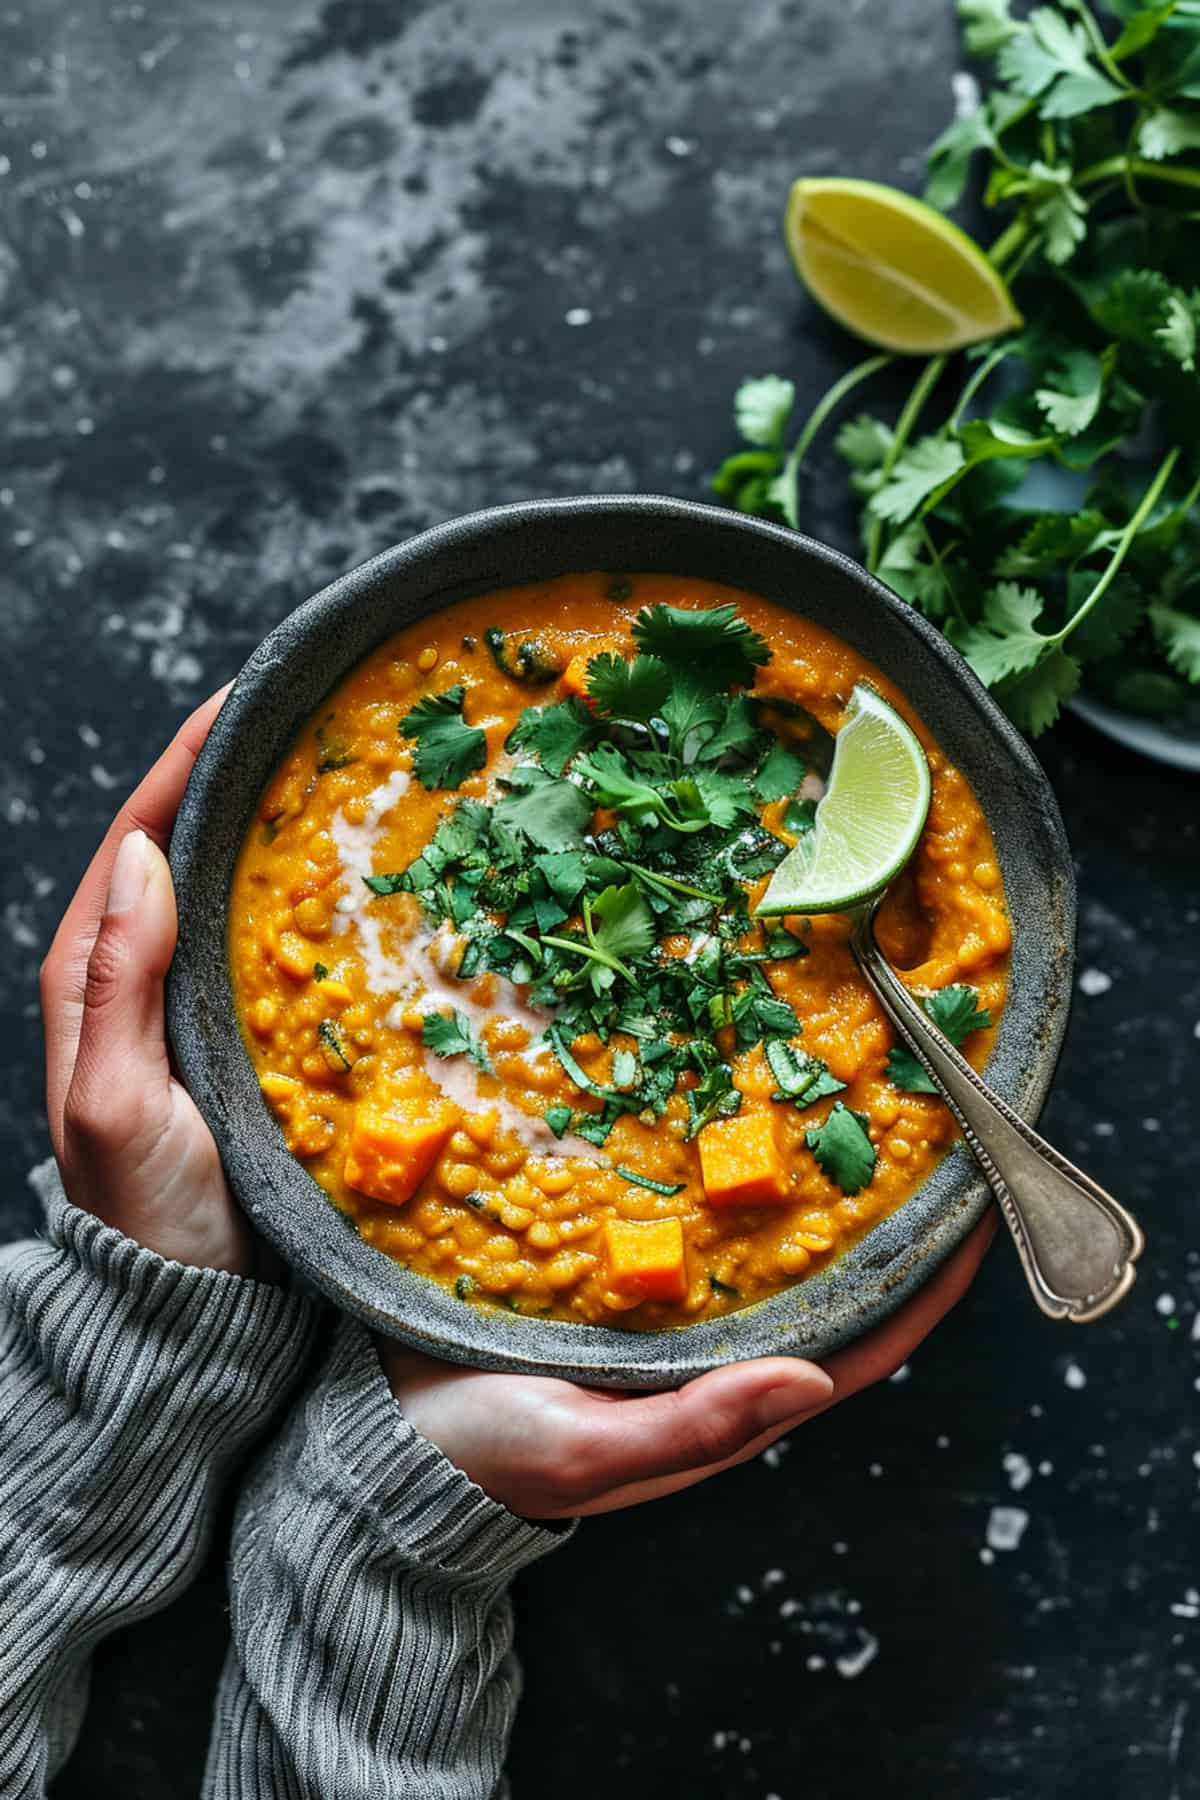 Red lentil dhal curry in a blue bowl.